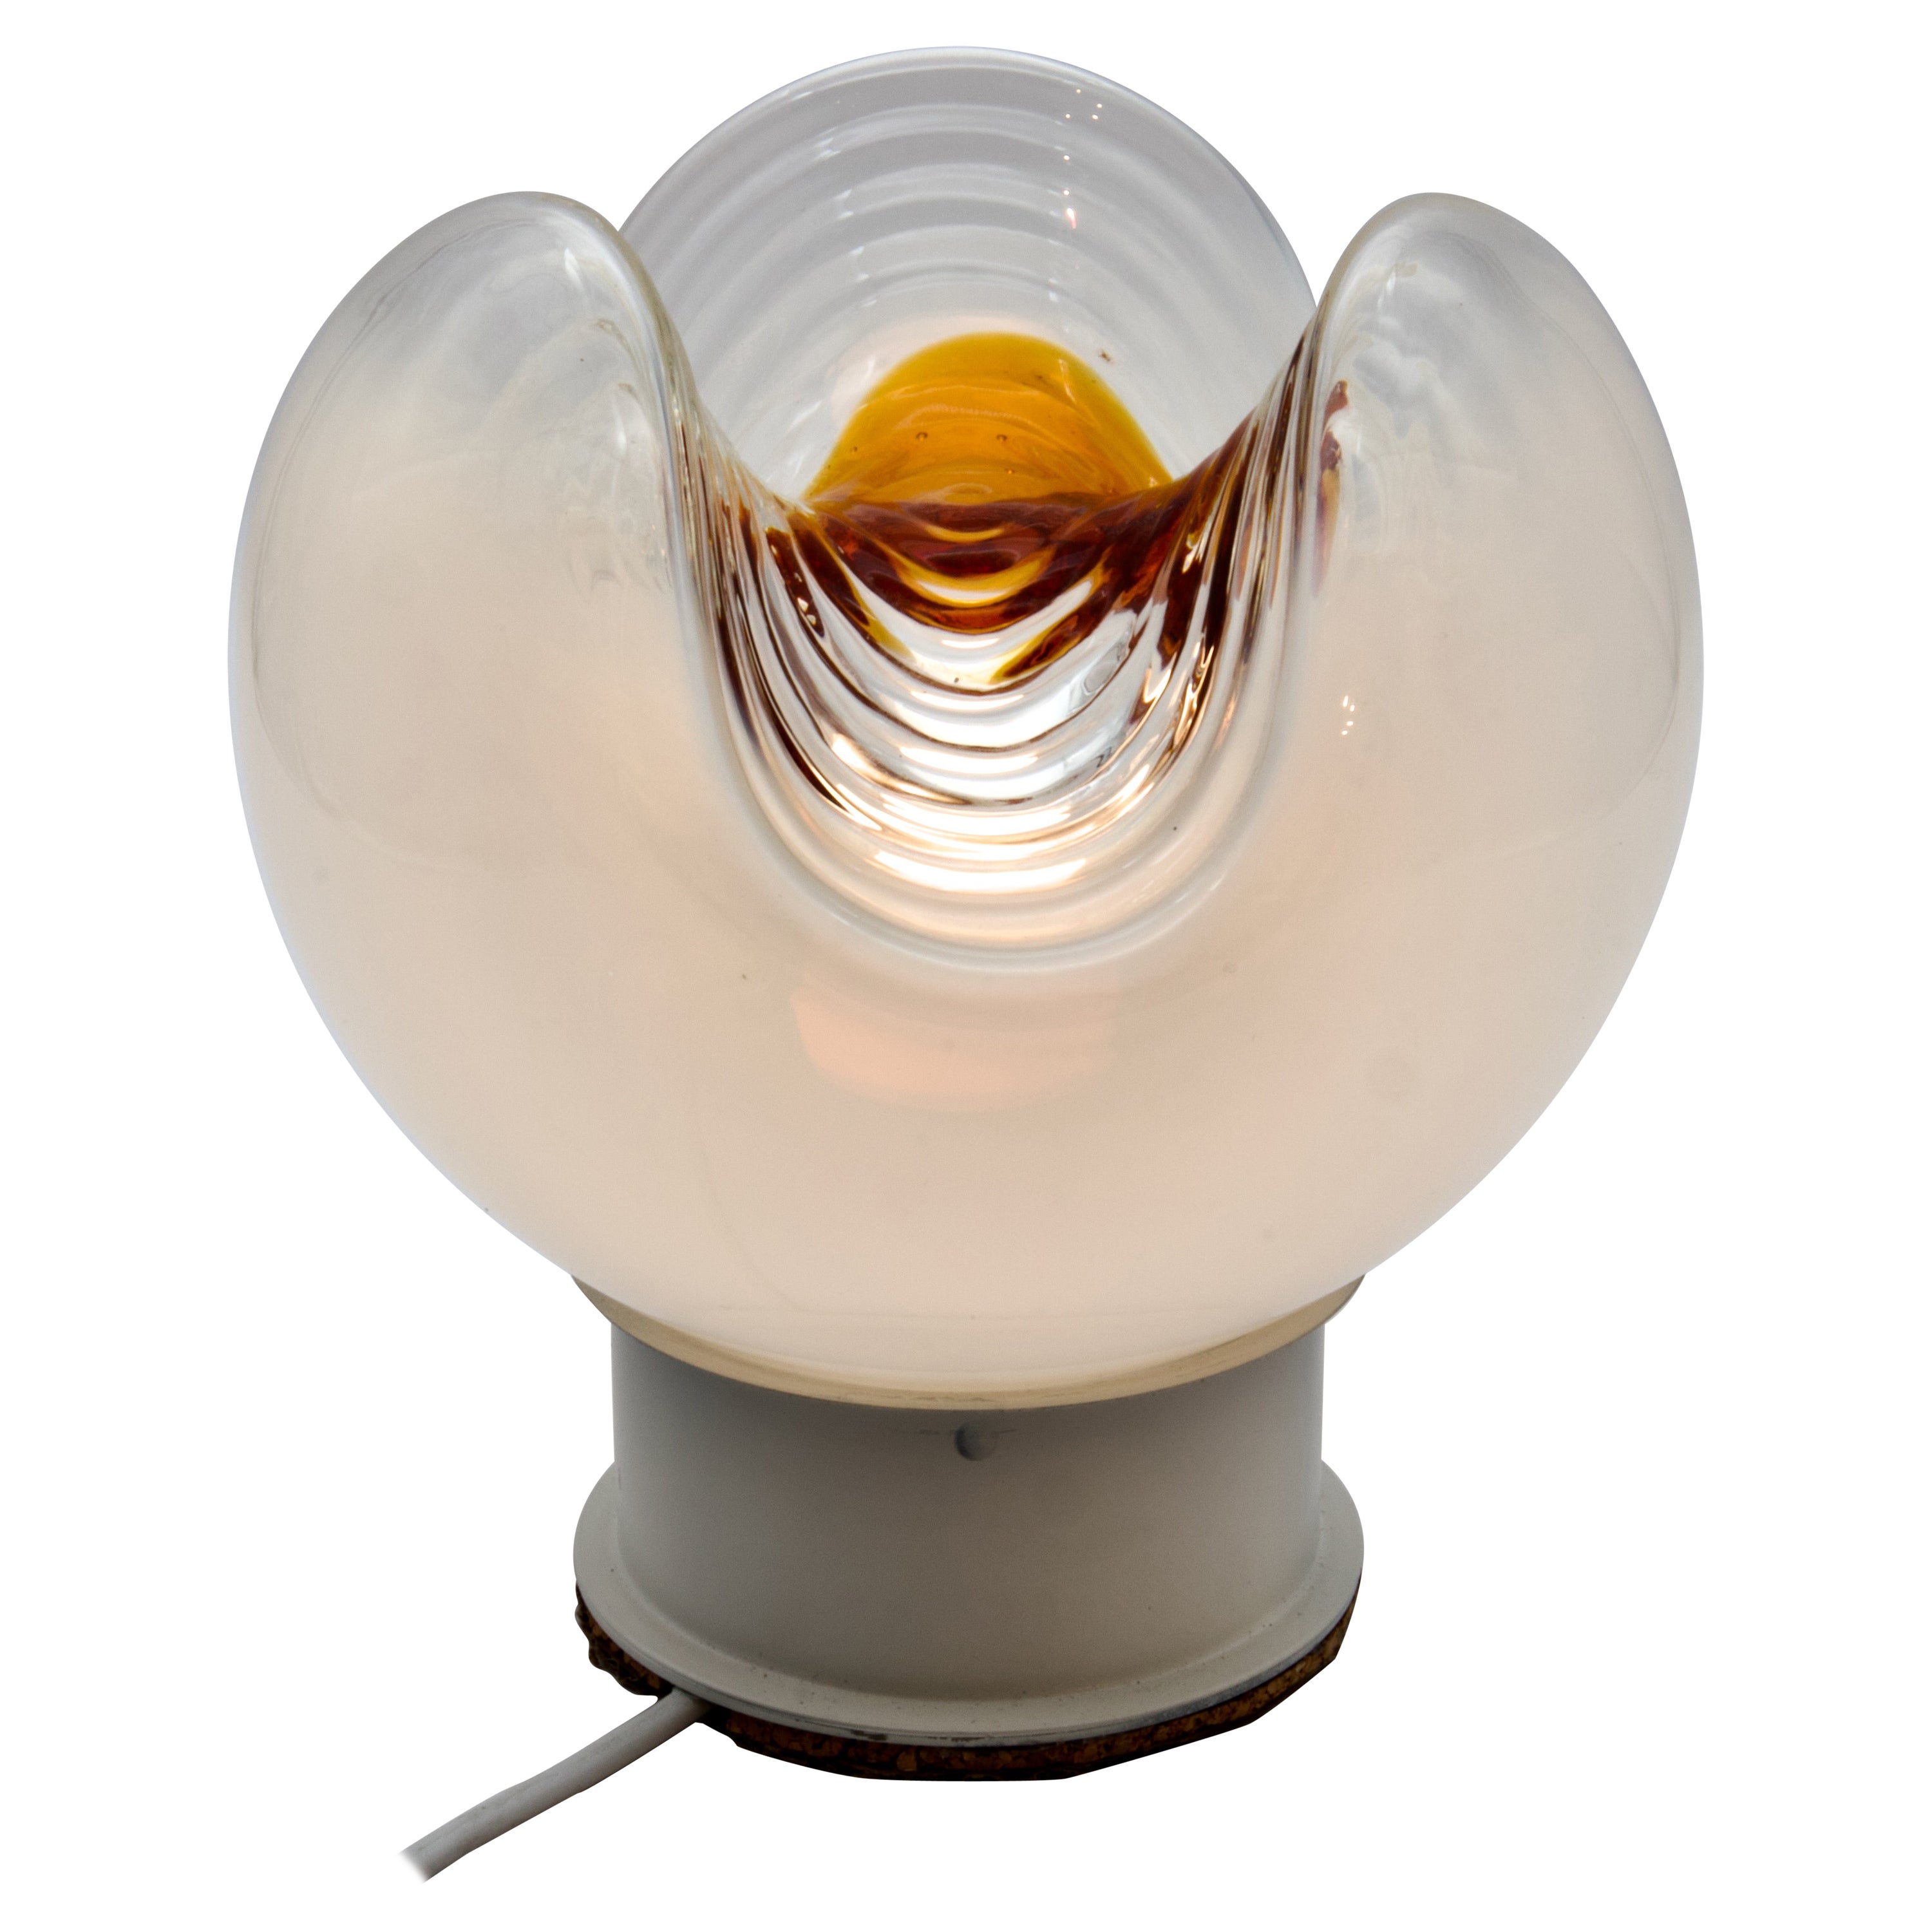 Mesmerizing XL Murano Glass Table Lamp or Floor Lamp, Mazzega Italy 1970s For Sale